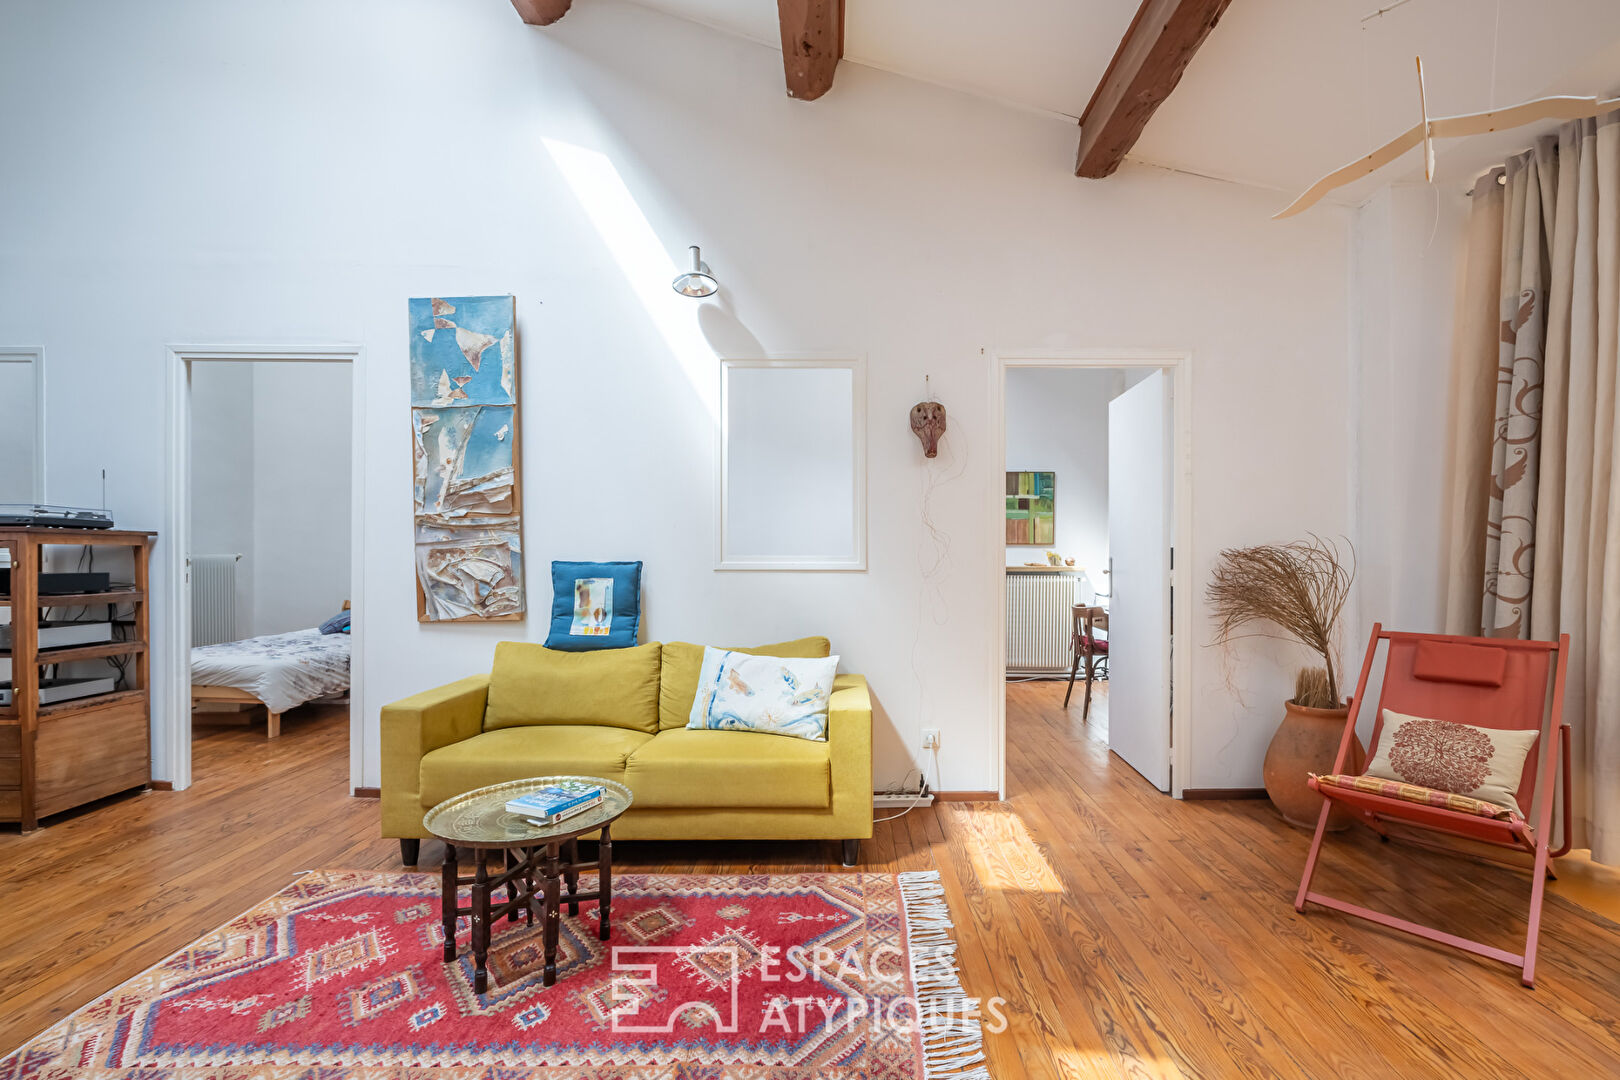 Superb house with generous volumes in the heart of Sète